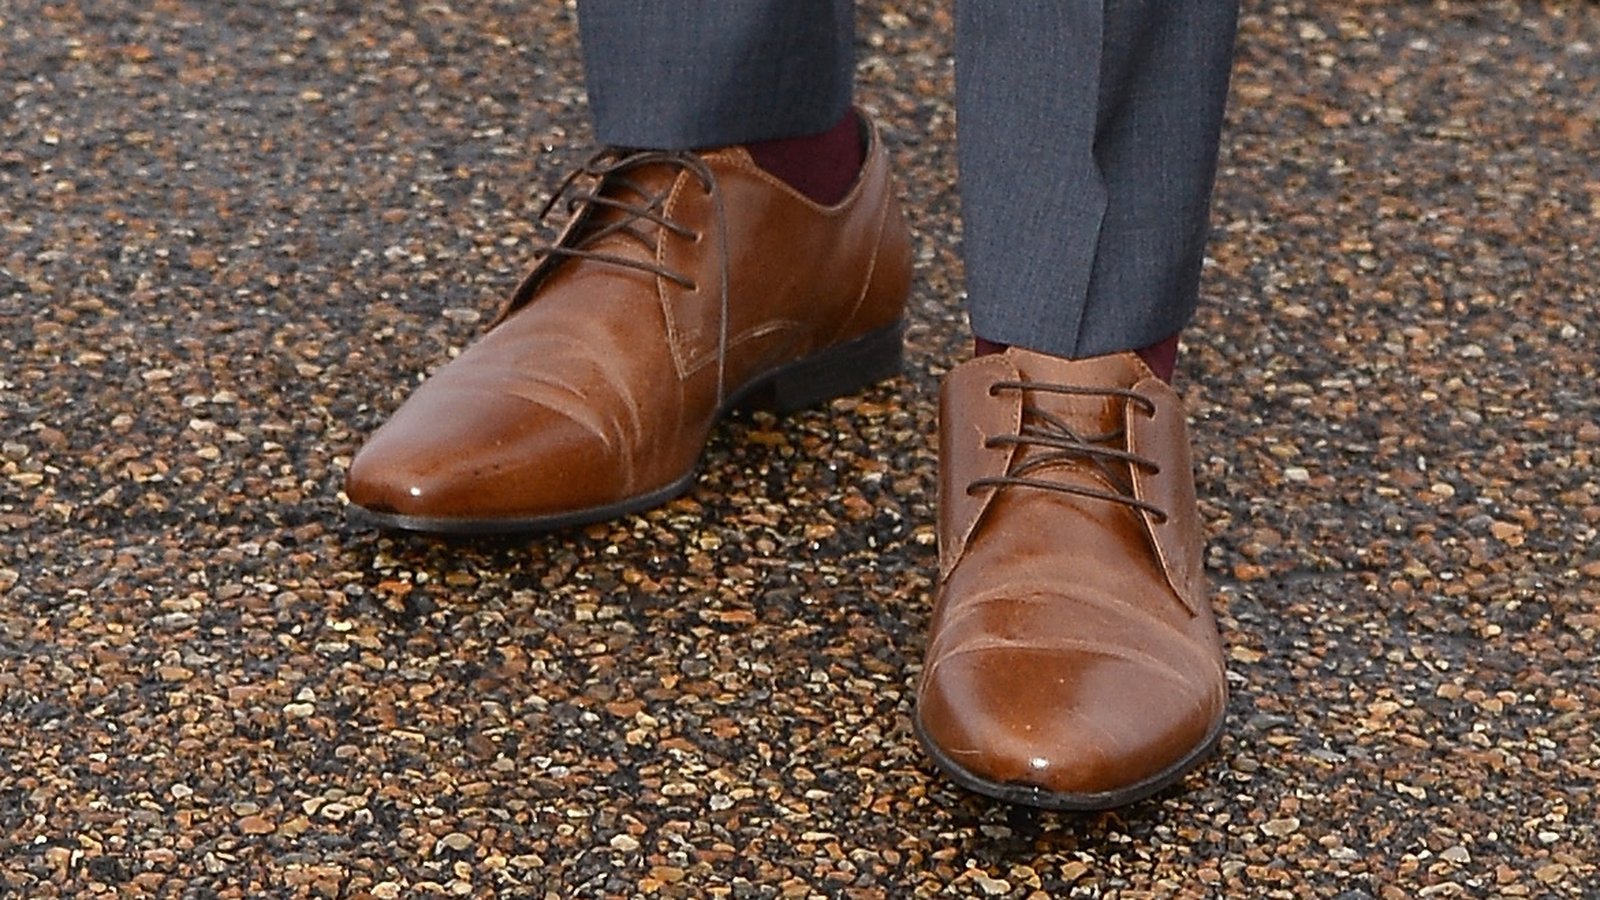 70 Sports Brown shoe company jobs for Trend in 2022